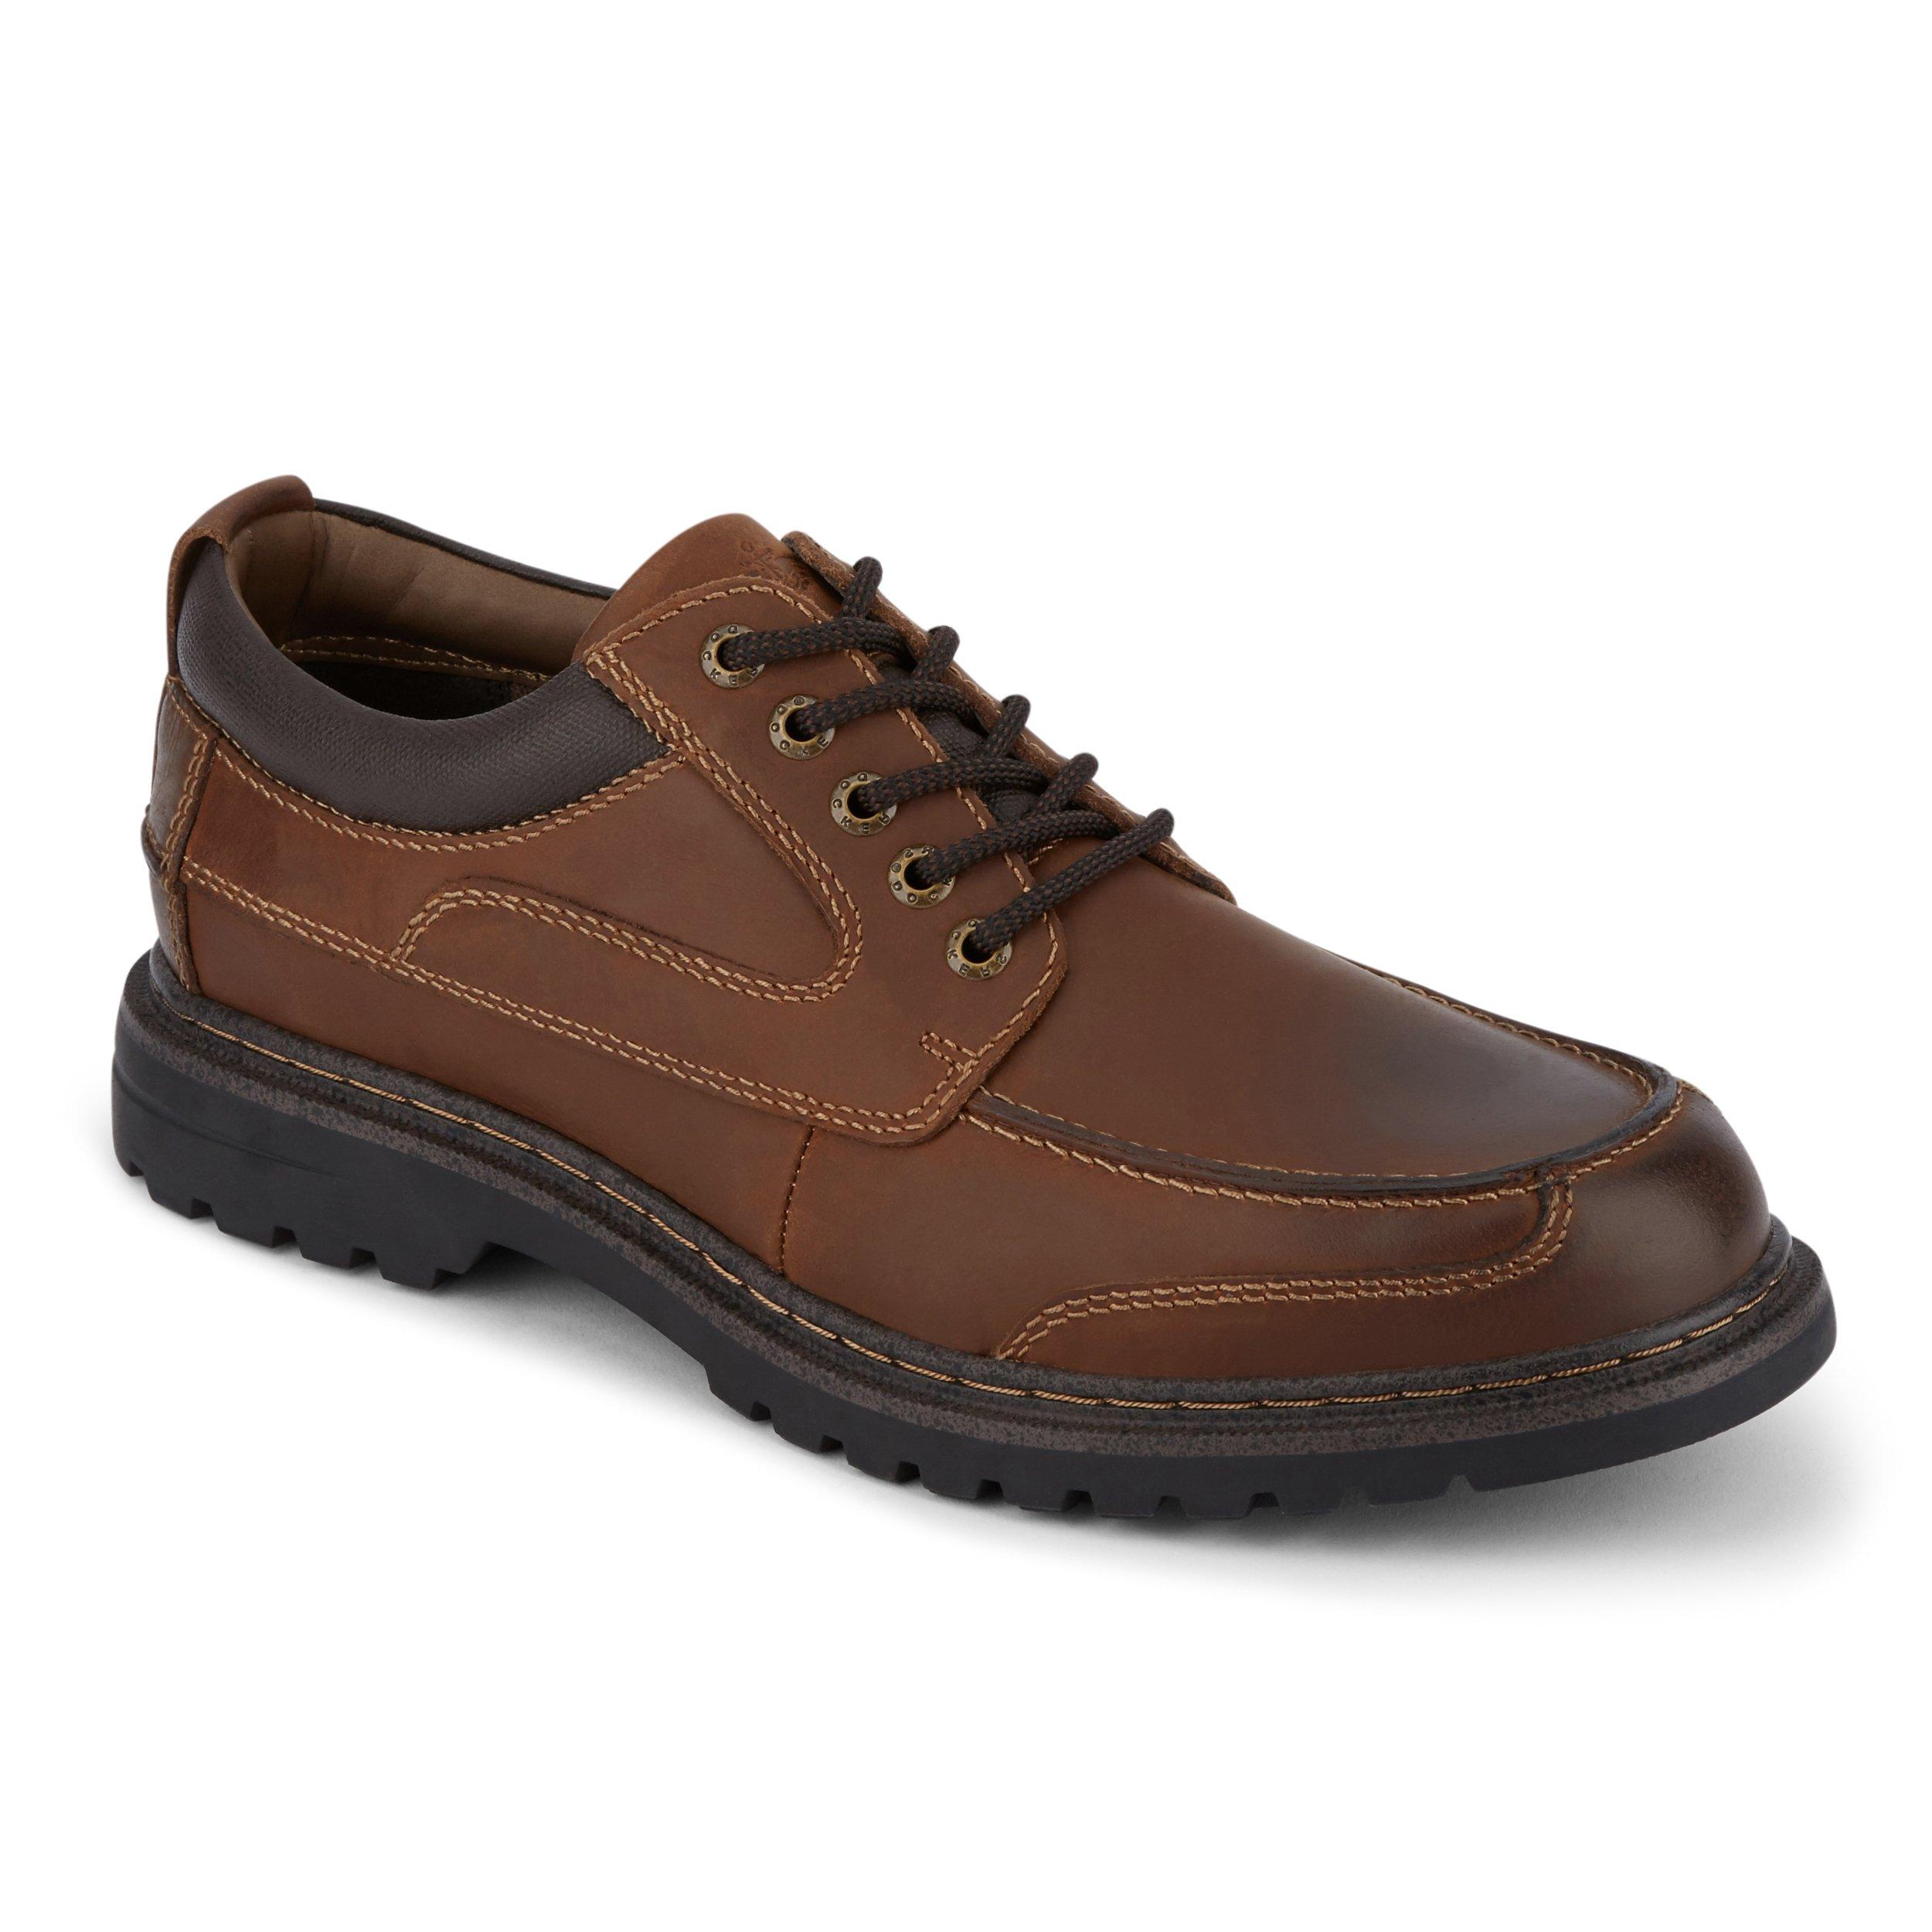 Dockers Overton - Rugged Oxford in Brown for Men - Lyst